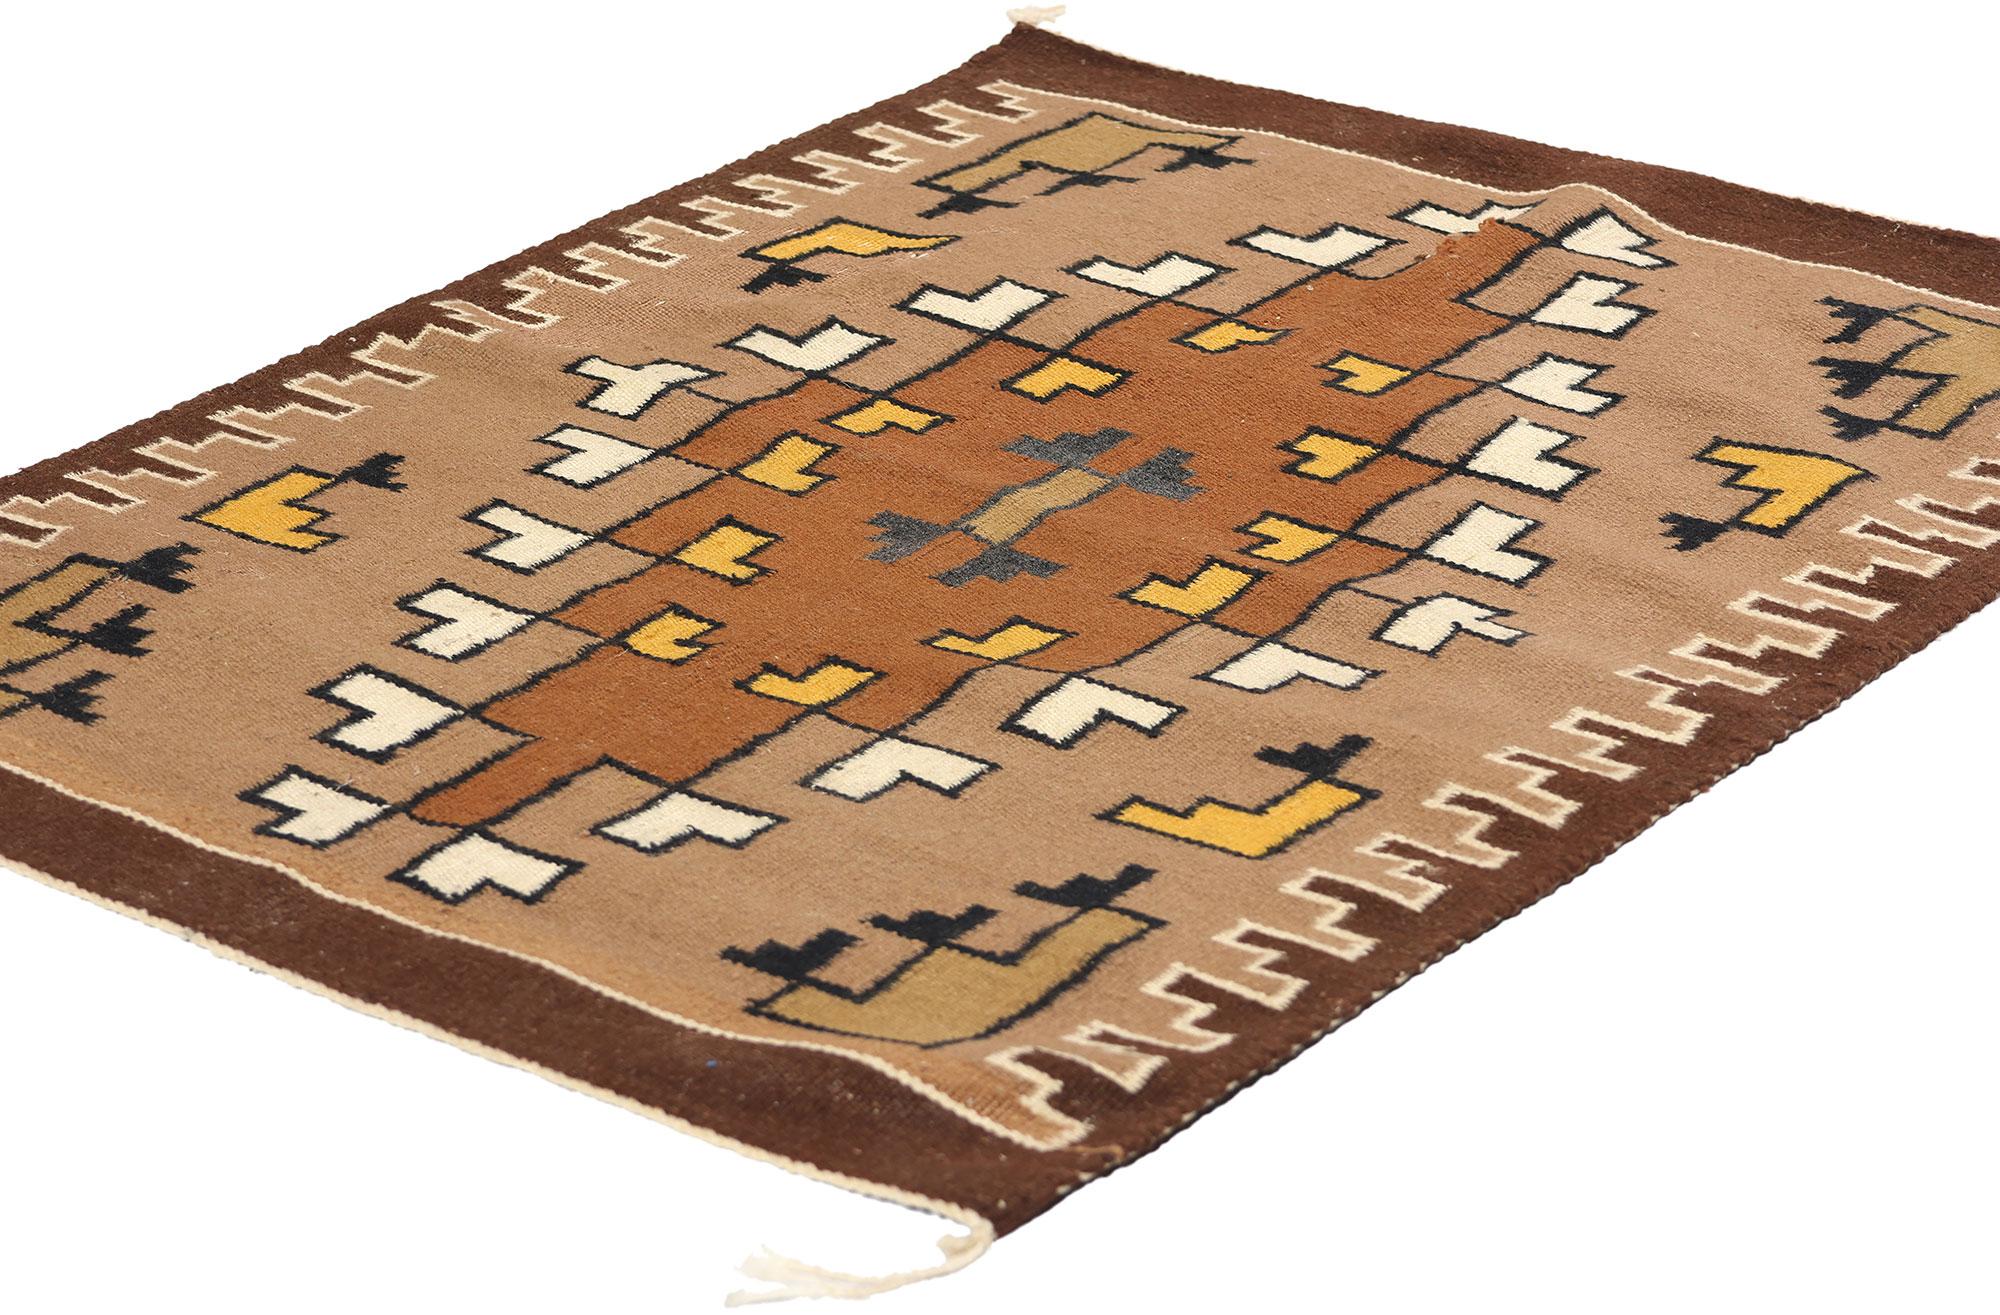 78748 Antique Two Grey Hills Navajo Rug, 02'03 x 02'10. Two Grey Hills Navajo rugs, originating from the Two Grey Hills region within the Navajo Nation in the southwestern United States, are esteemed for their intricate designs, fine craftsmanship,